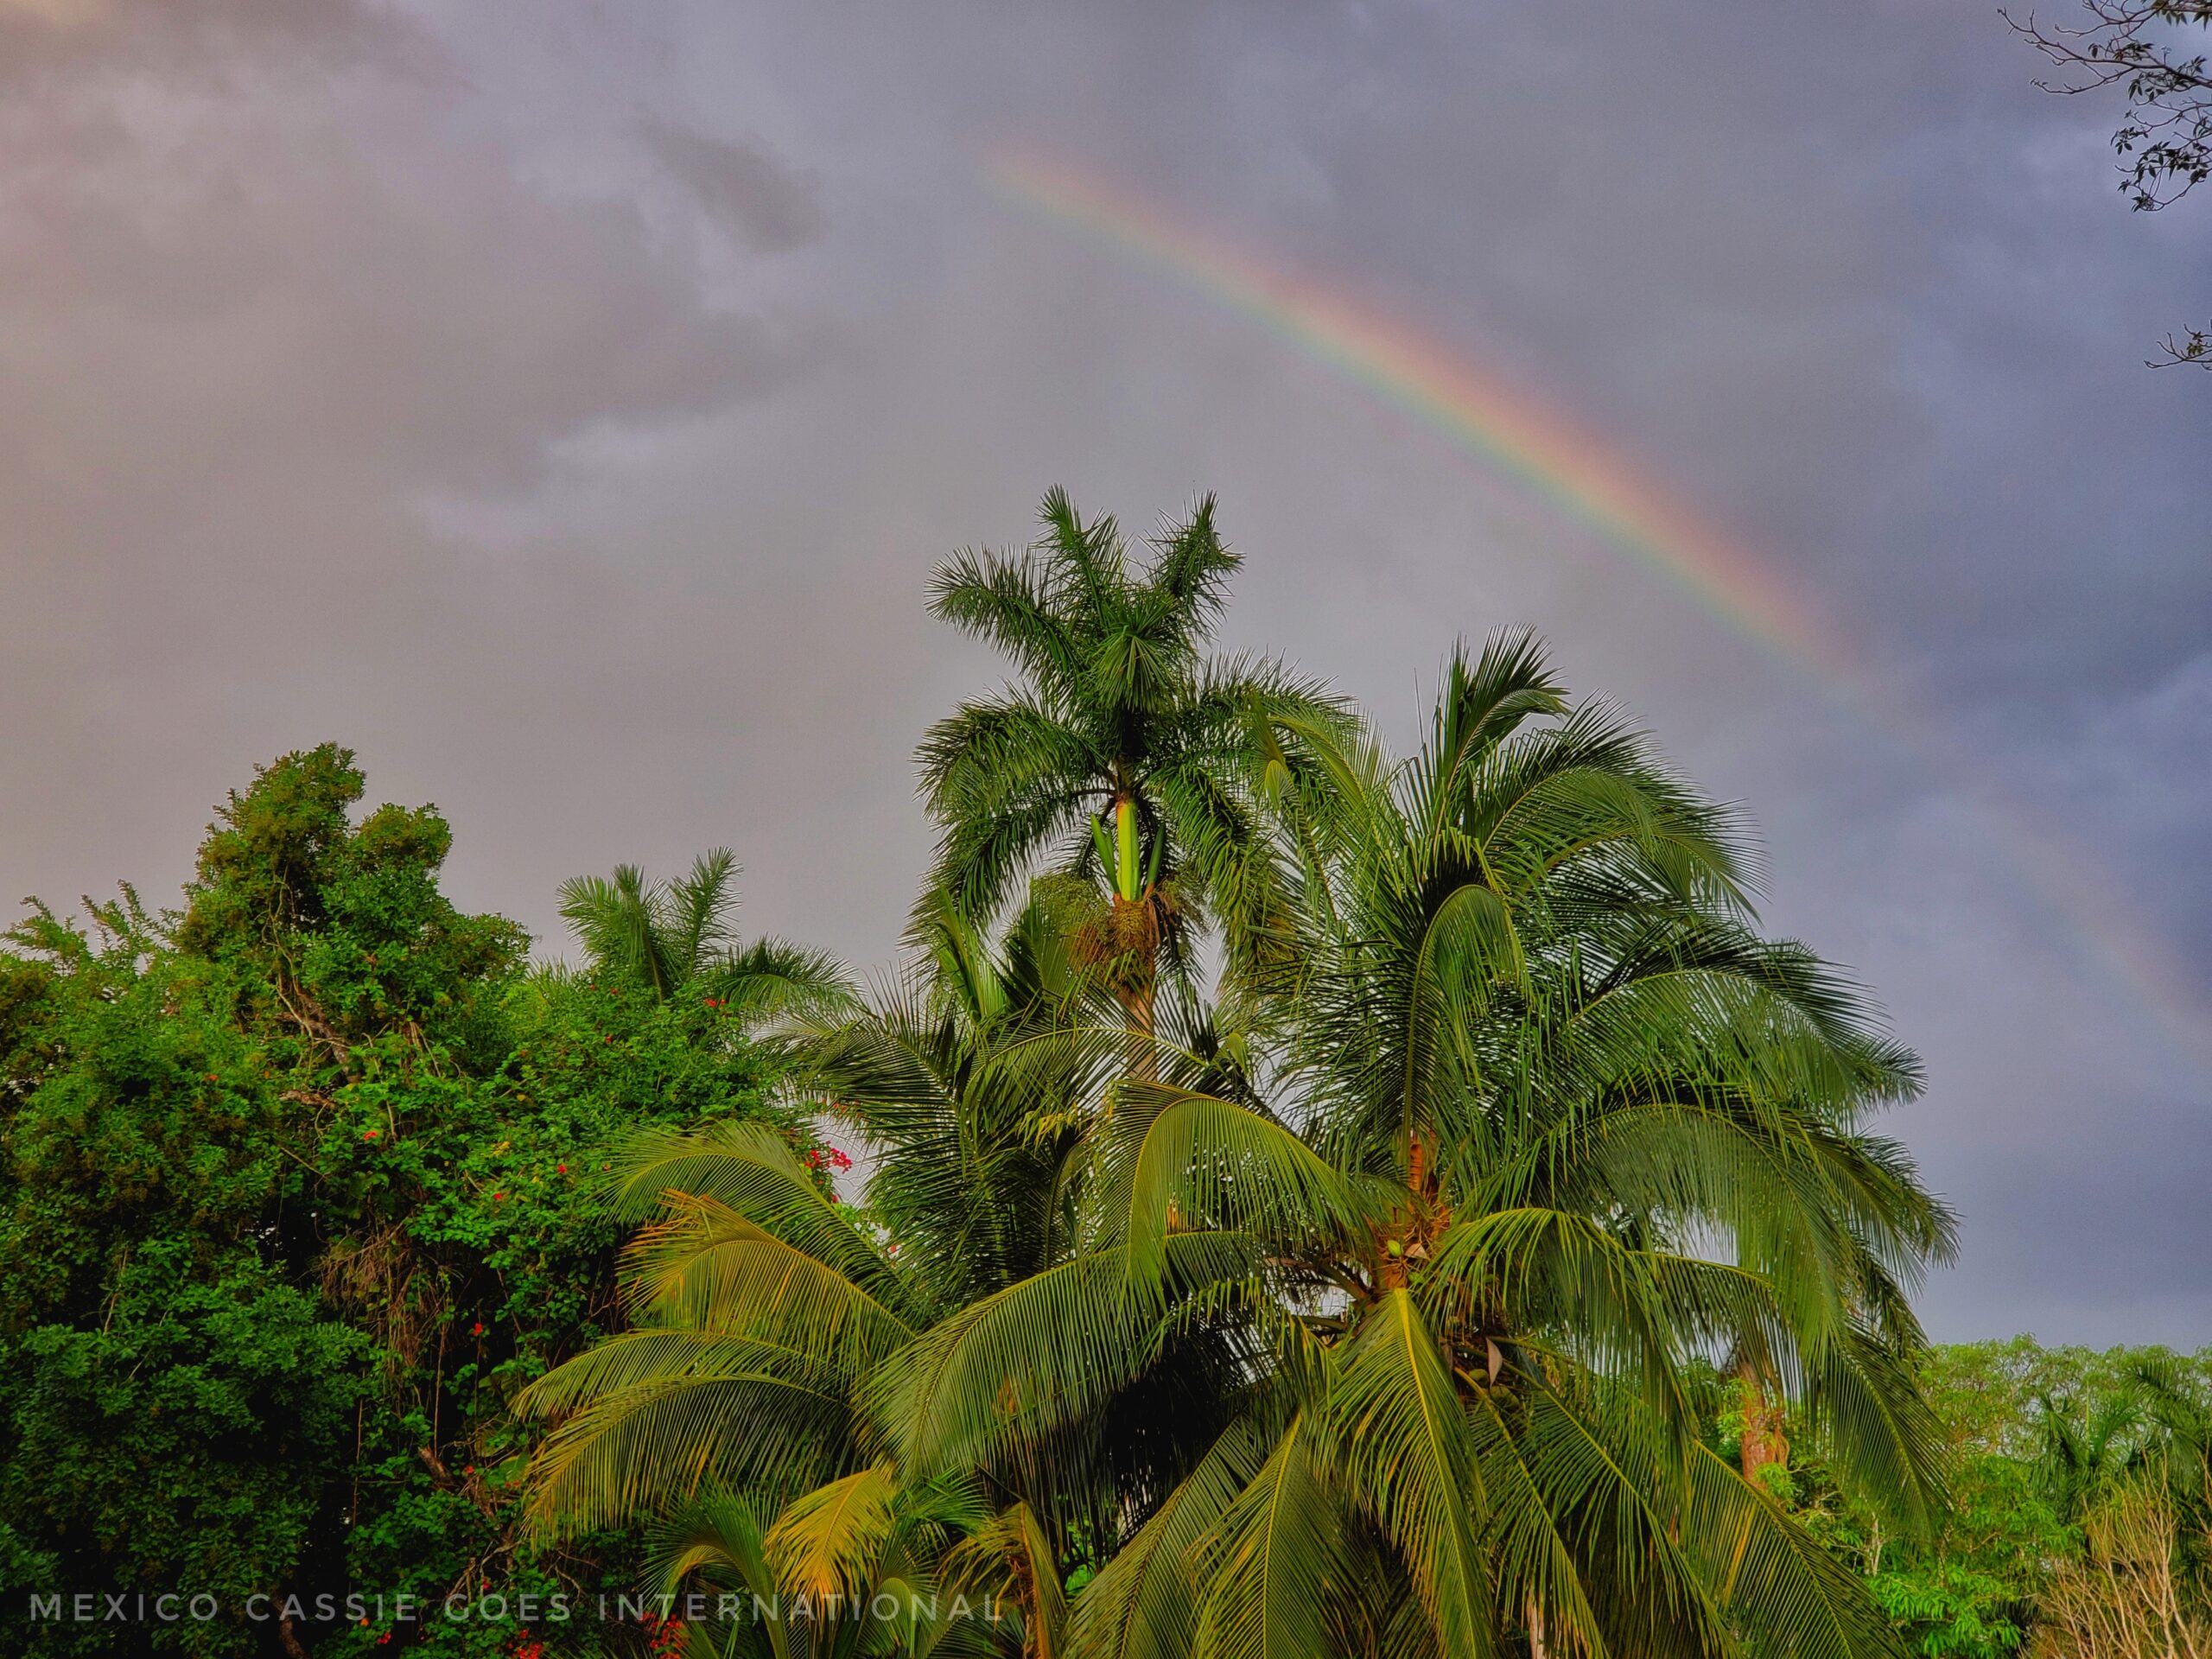 partial rainbow in dark sky over palm trees